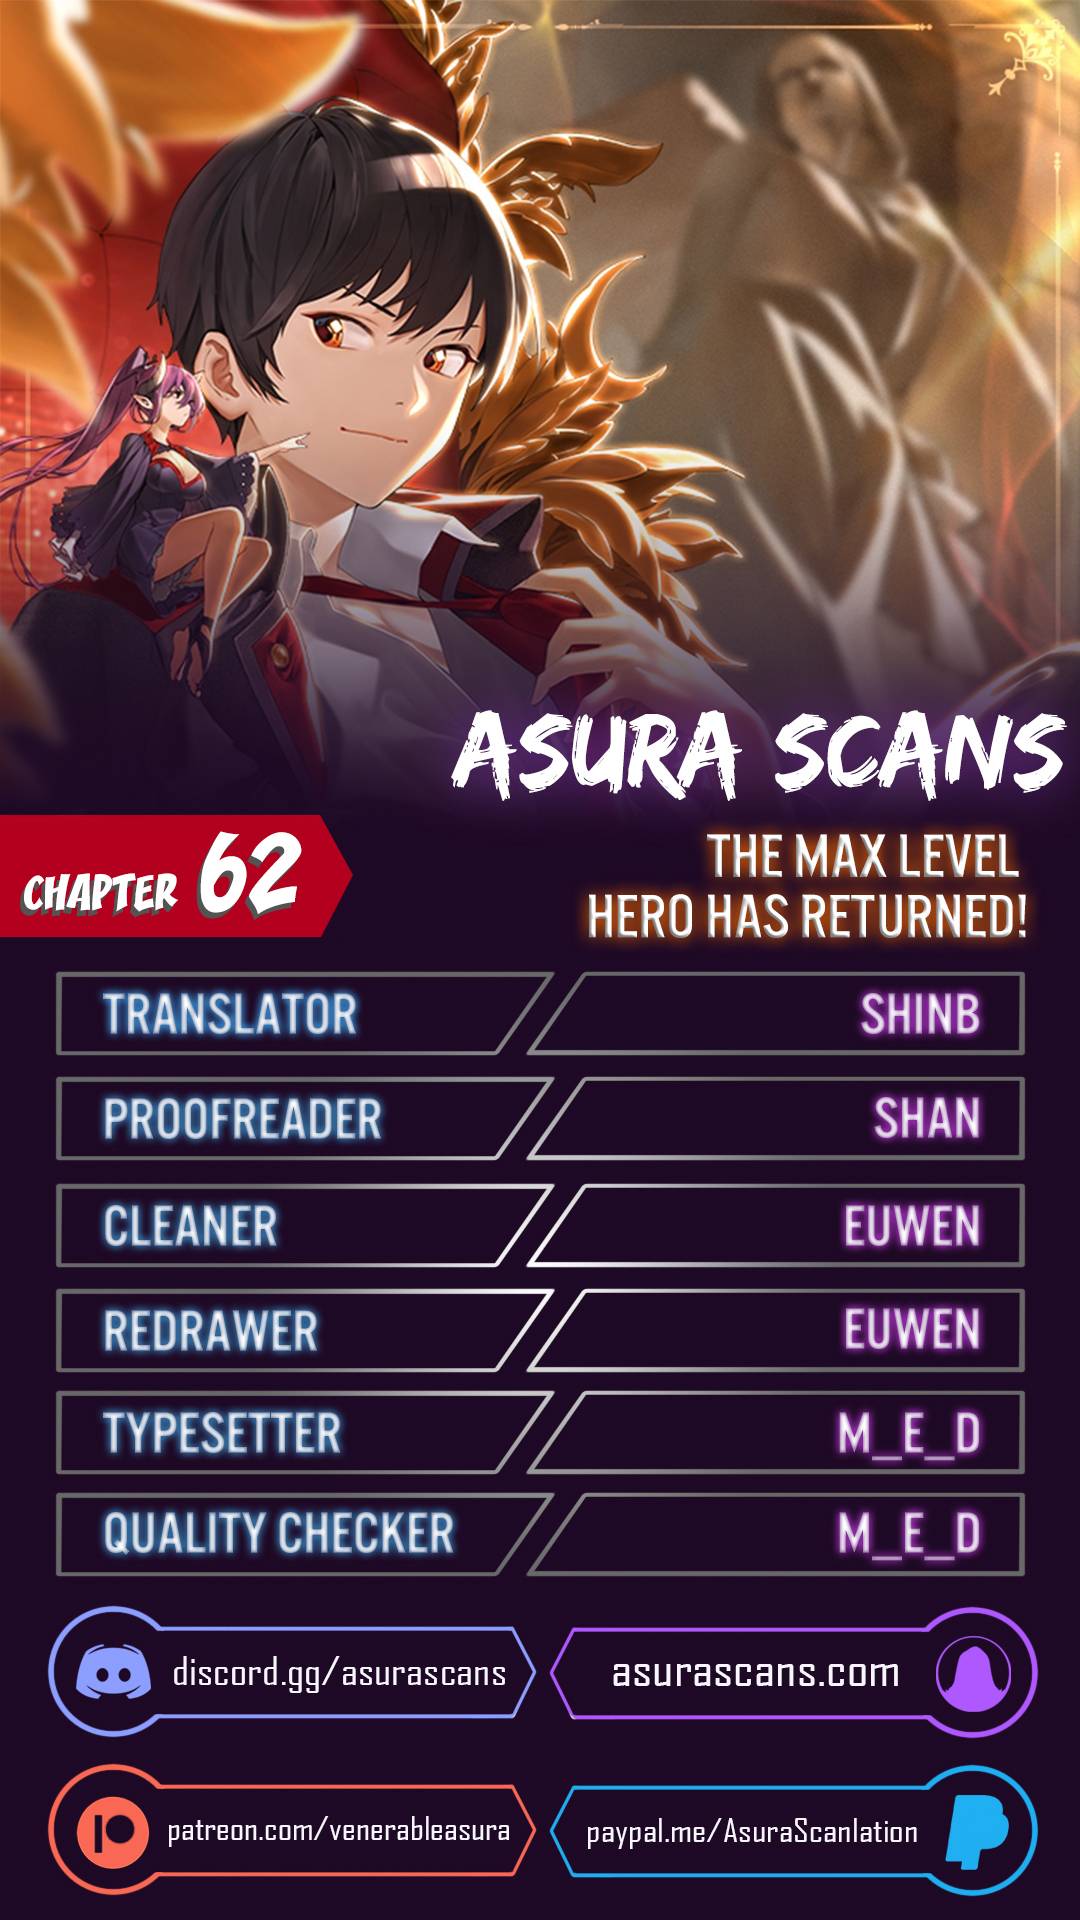 The MAX leveled hero will return! Chapter 62